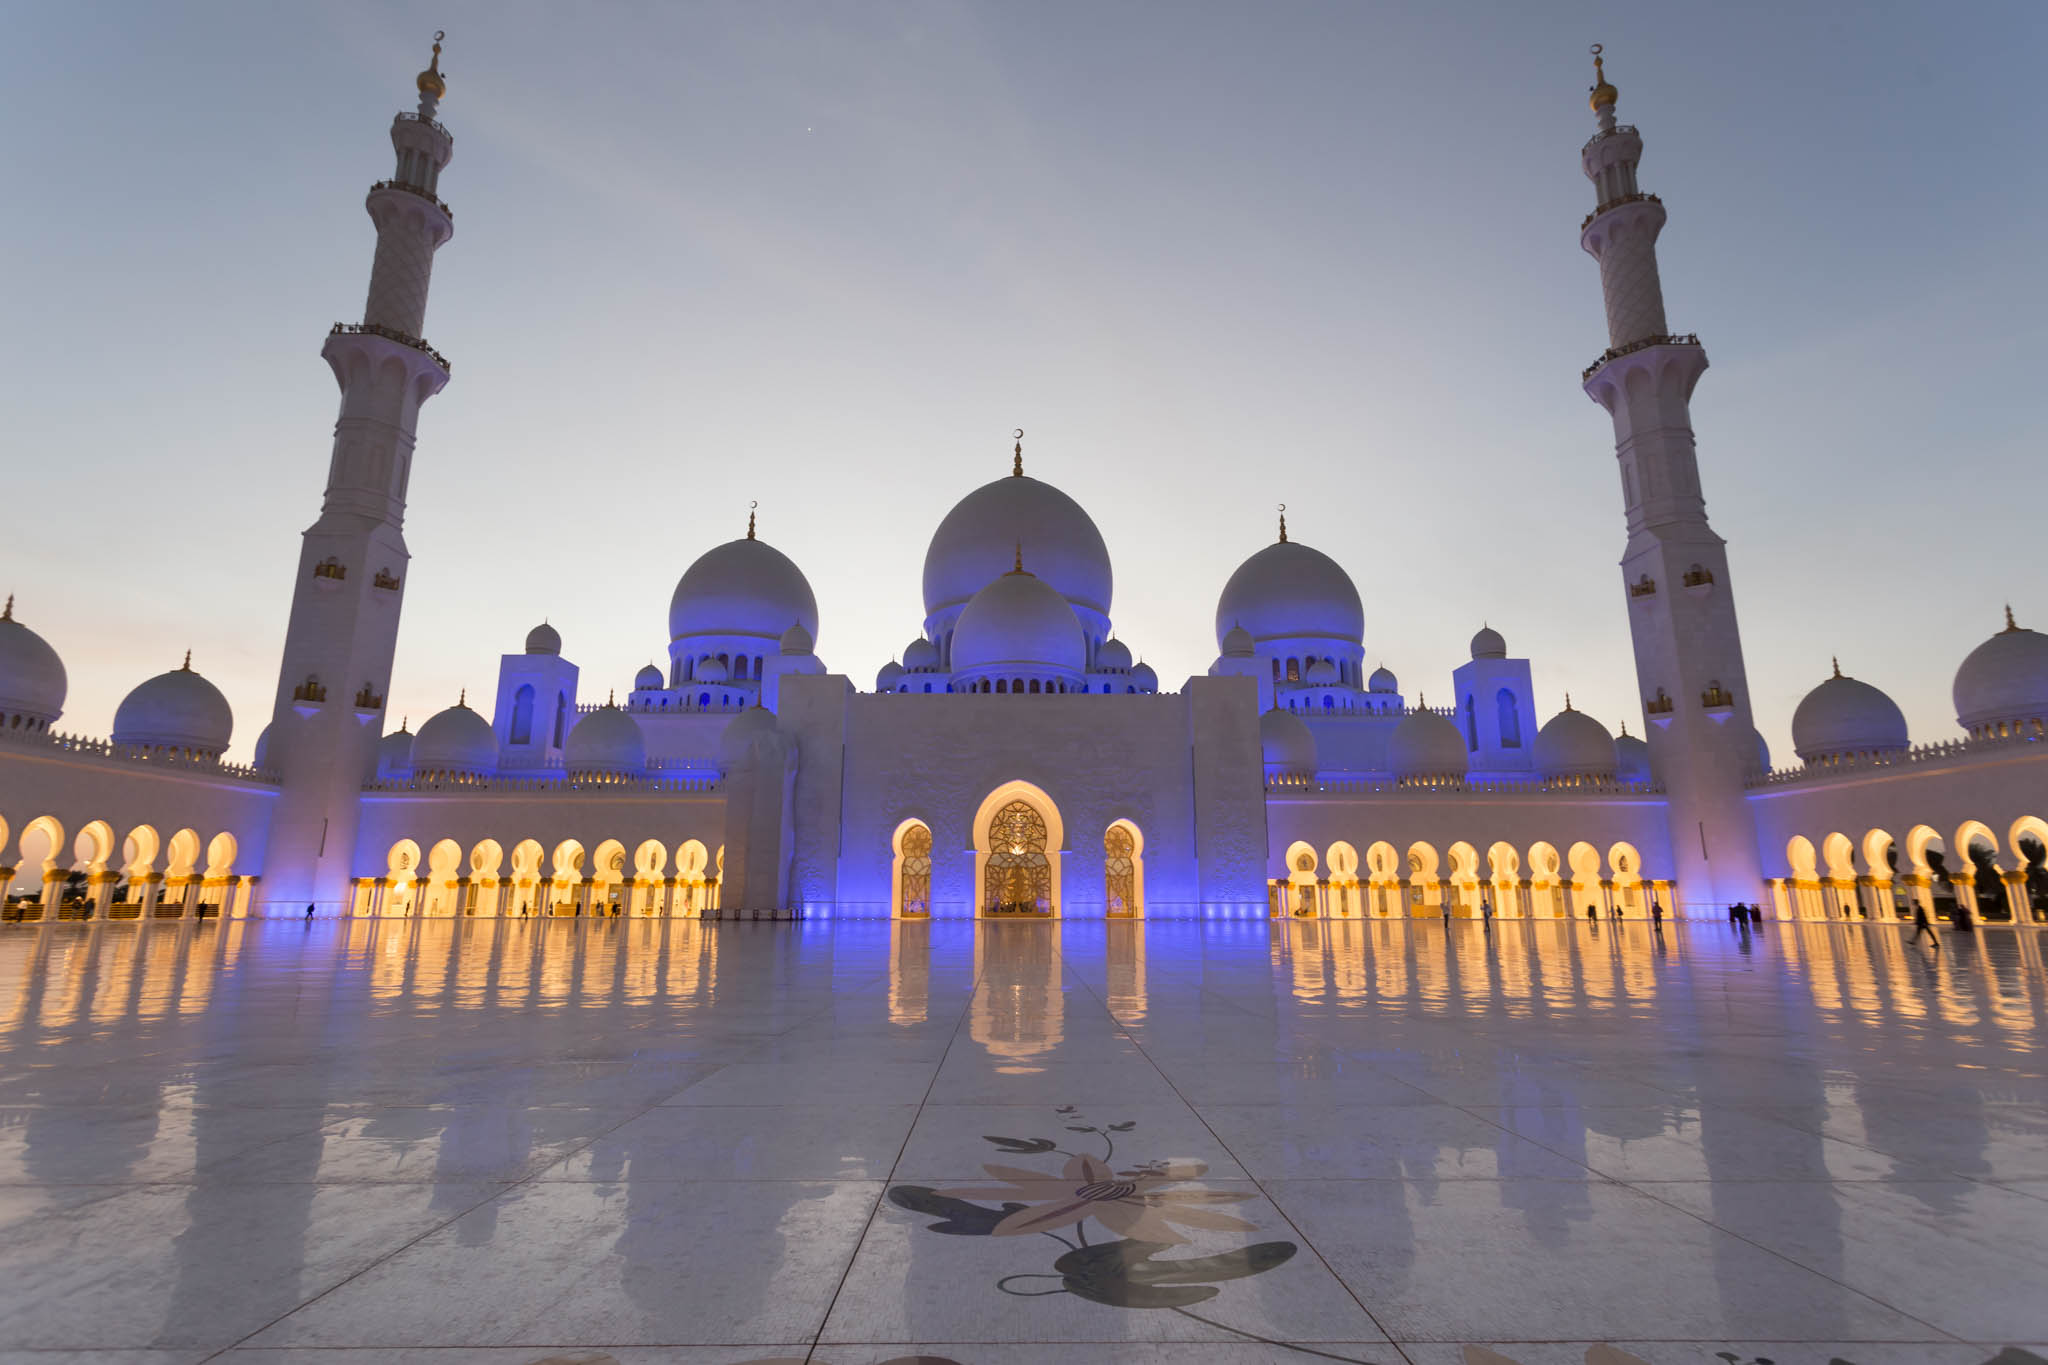 a large white building with domes and towers with Sheikh Zayed Mosque in the background